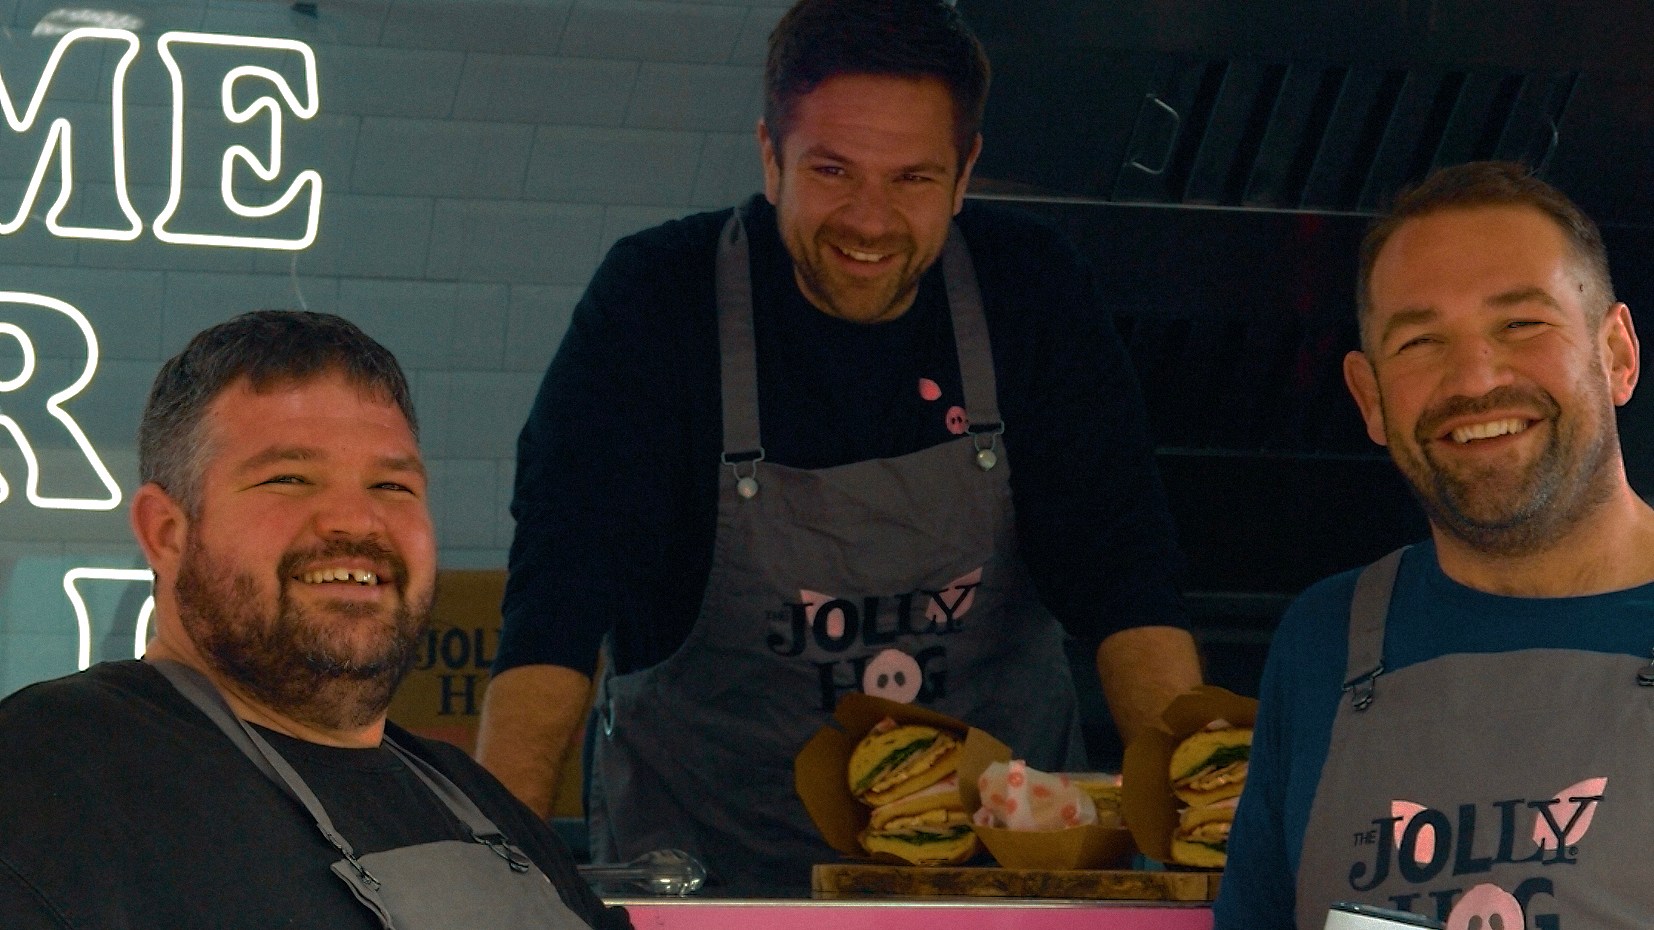 The Jolly Hog co-founders, from left: Josh, Max and Olly Kohn. Max said getting a first meeting with a grocery buyer was easier said than done, with their efforts to cold-call Ocado initially failing